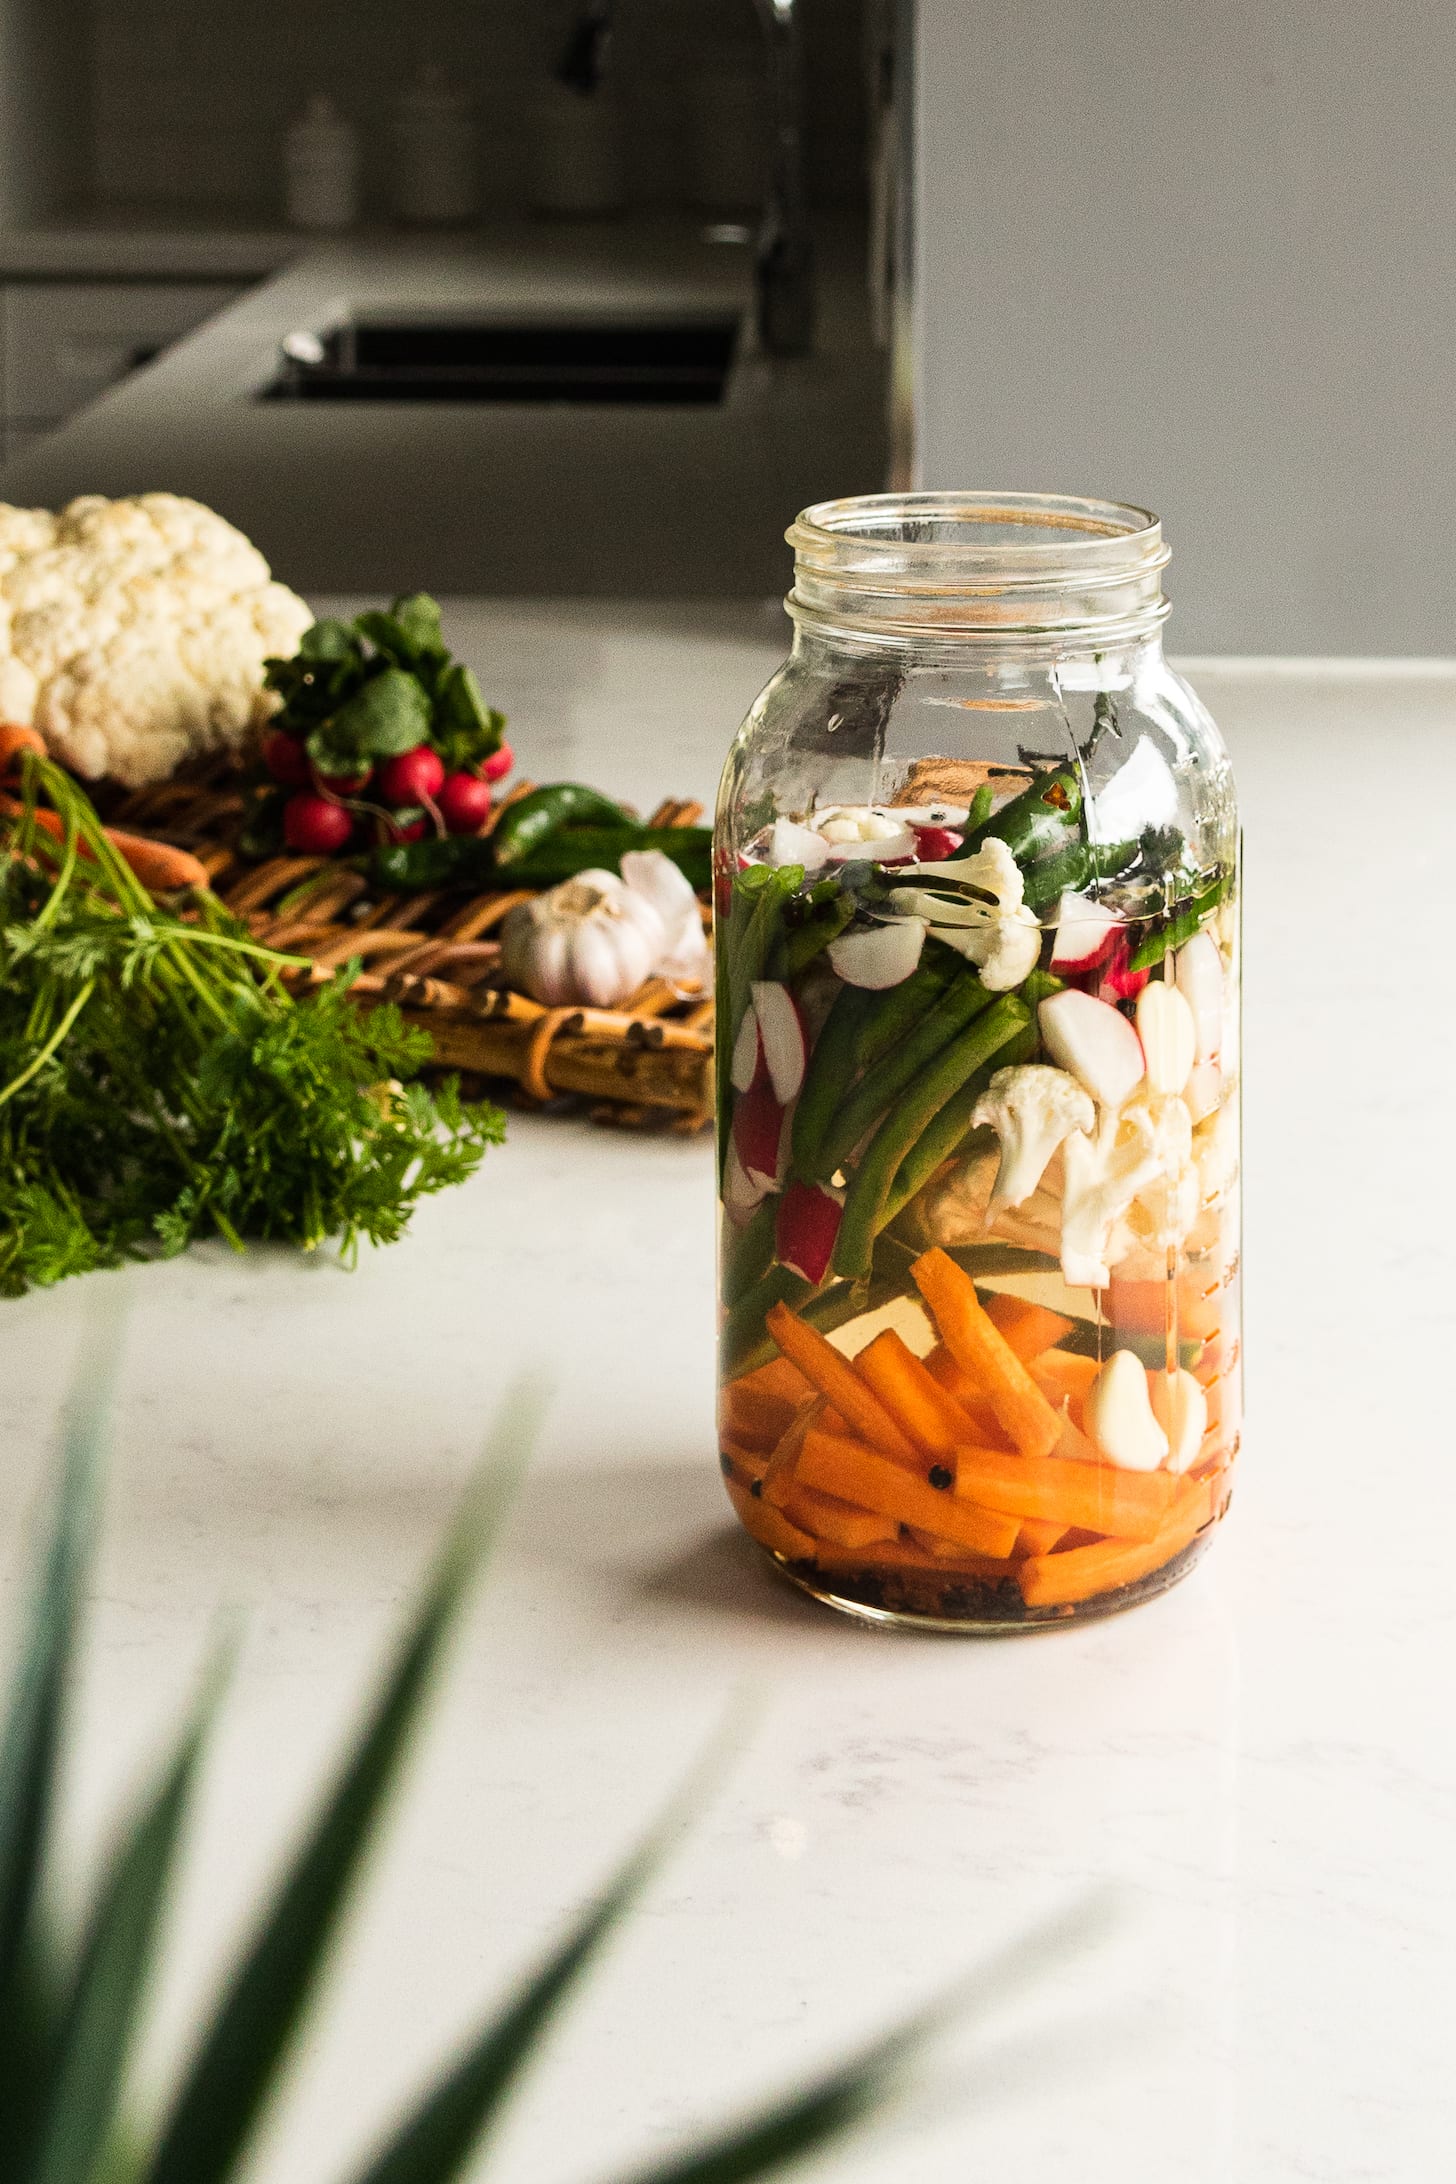 A jar of mixed vegetables in water on a countertop with fresh vegetables in the background.